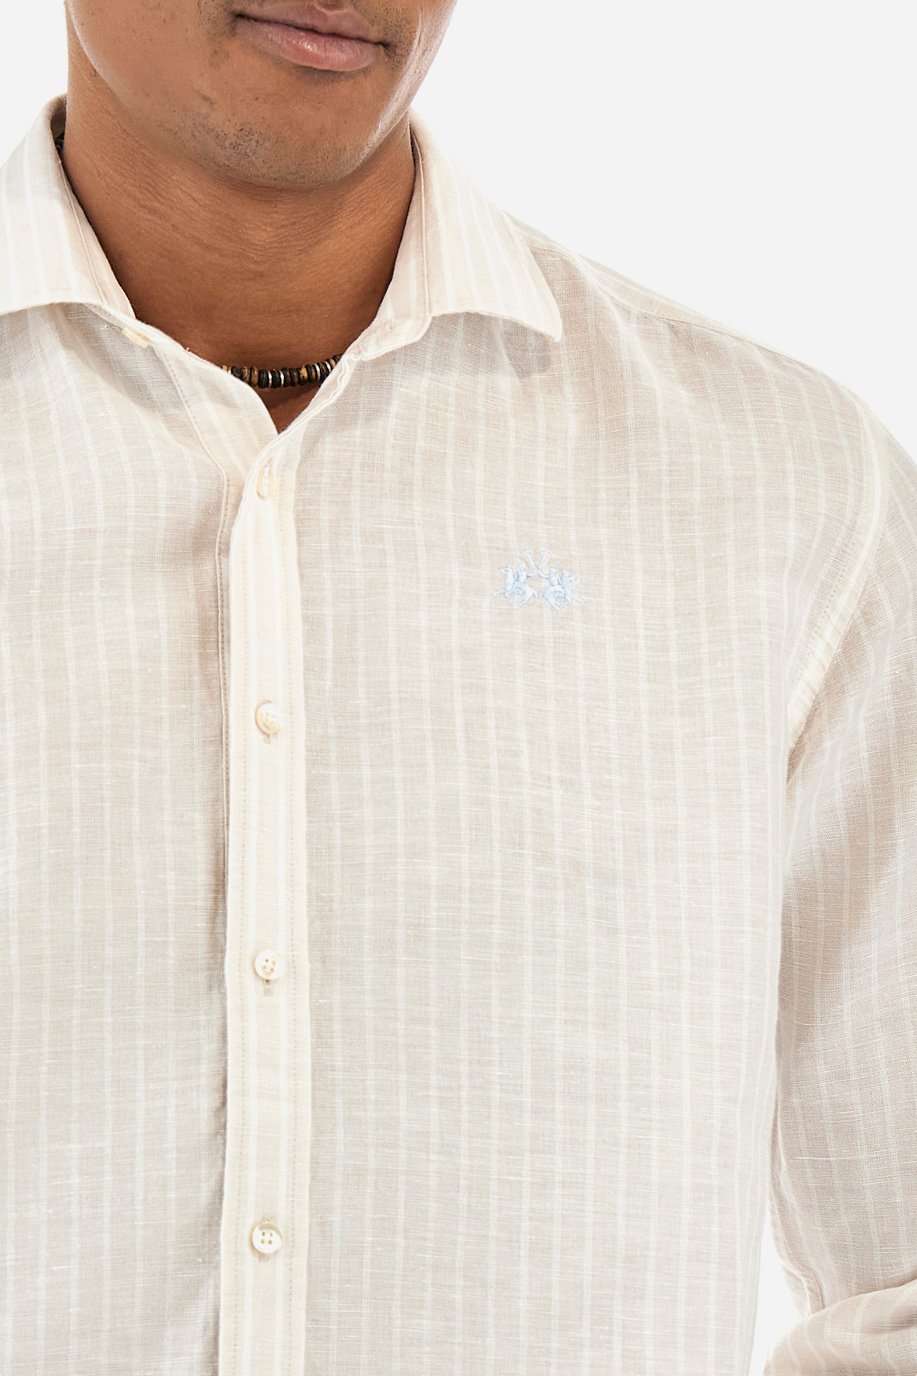 Striped patterned shirt in cotton and linen - Innocent - Shirts | La Martina - Official Online Shop